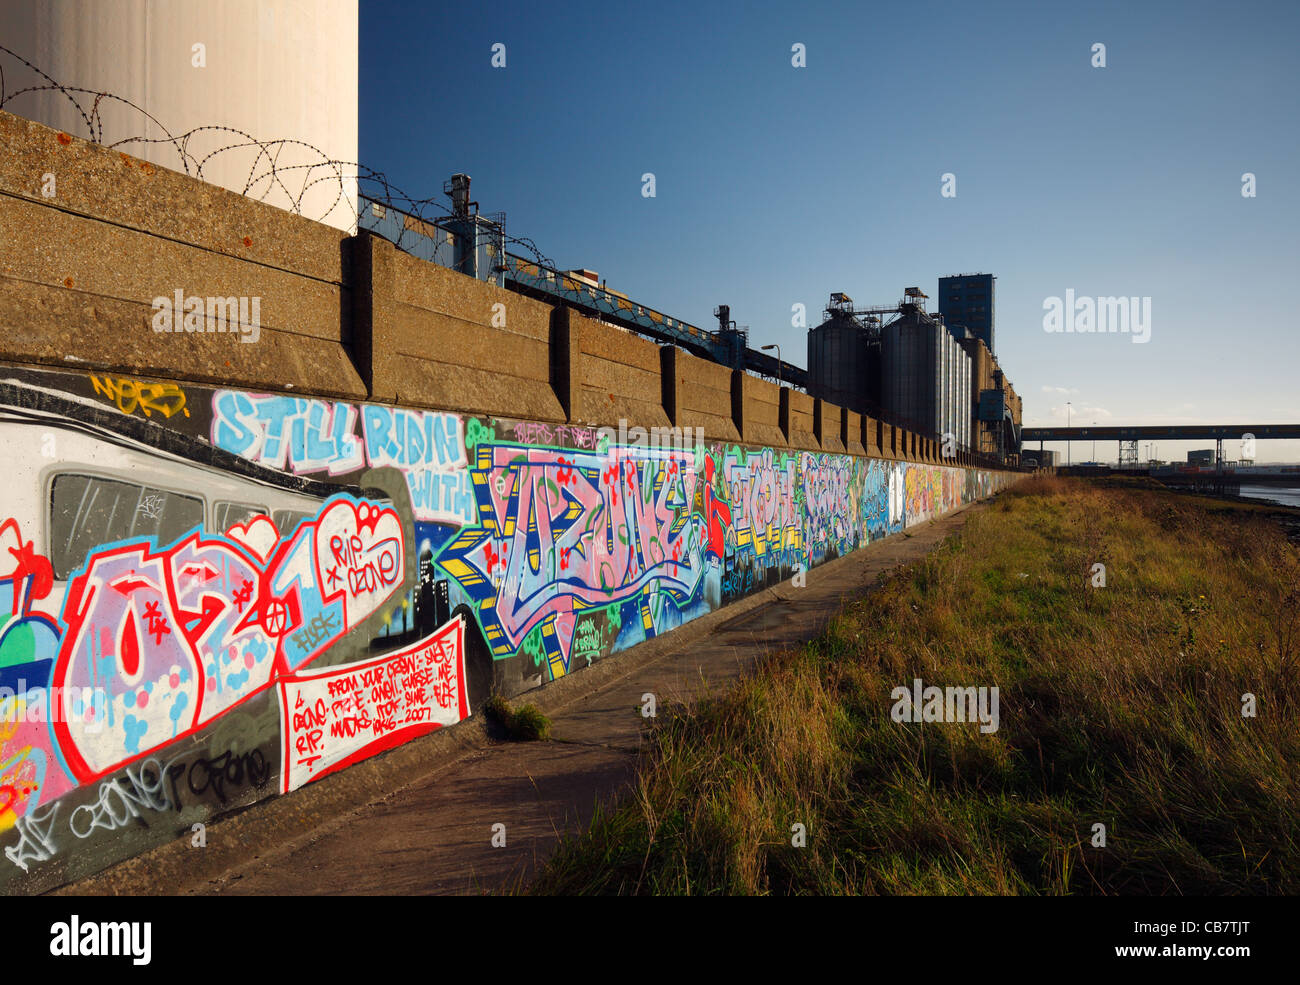 Street art dedicated to two graffiti artists Ozone and Wize who killed by a train in 2006. Stock Photo